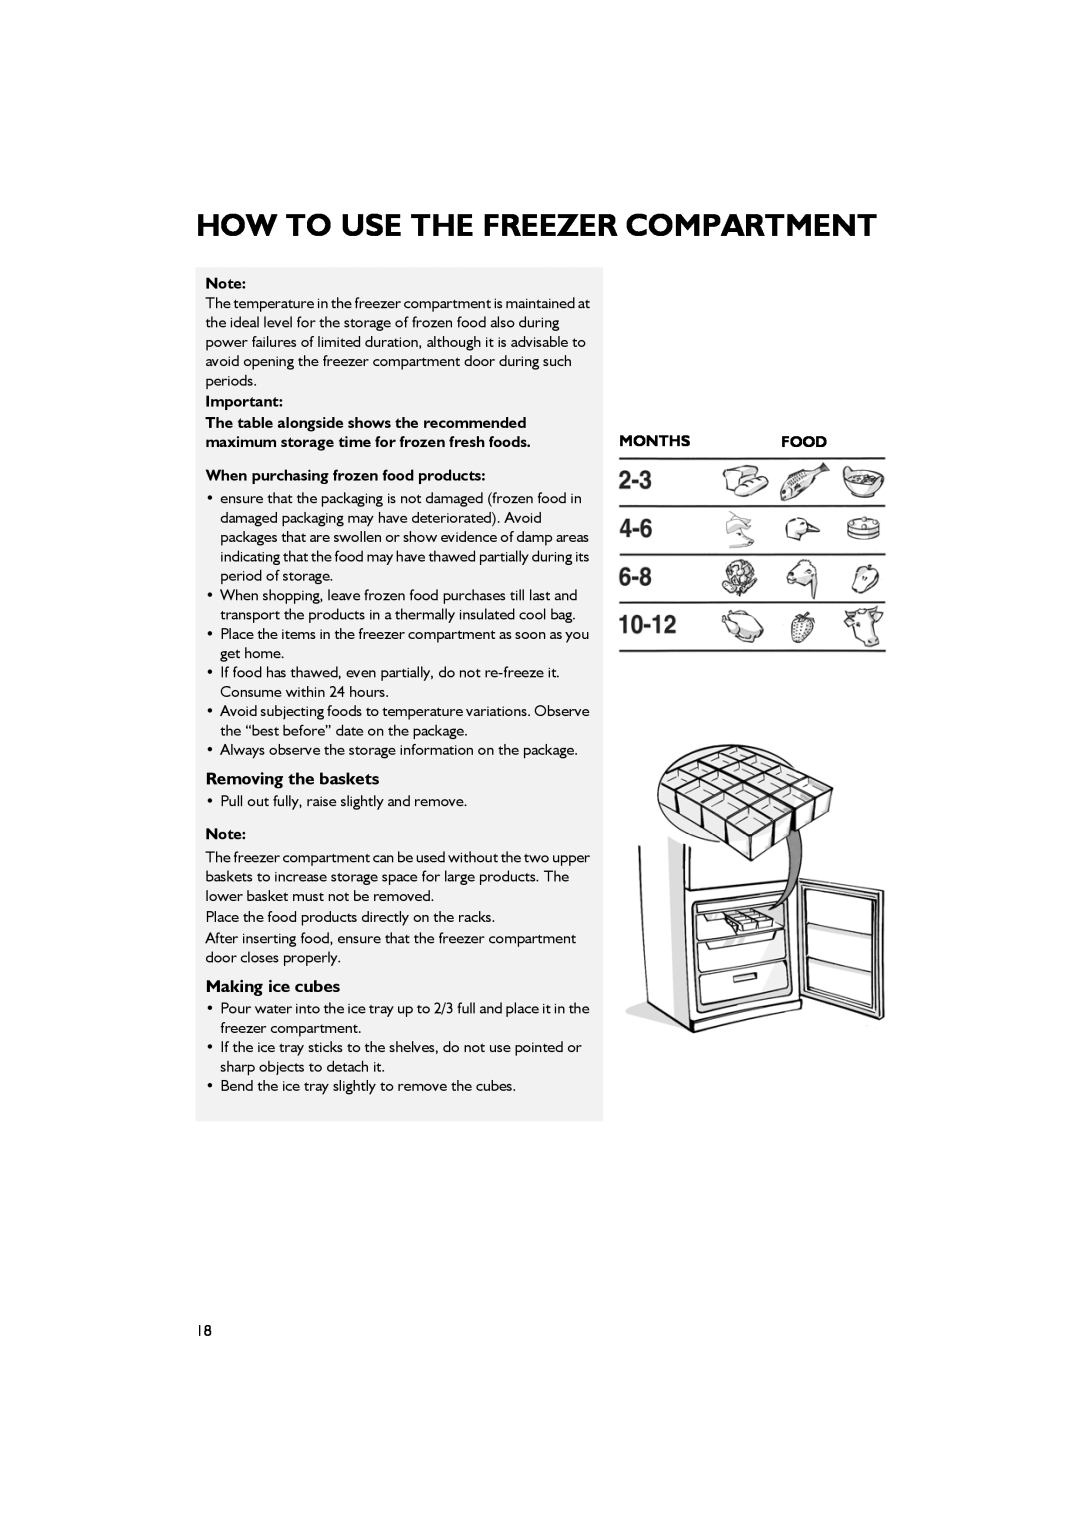 Smeg CR324A7 Removing the baskets, Making ice cubes, periods, The table alongside shows the recommended, Months, Food 